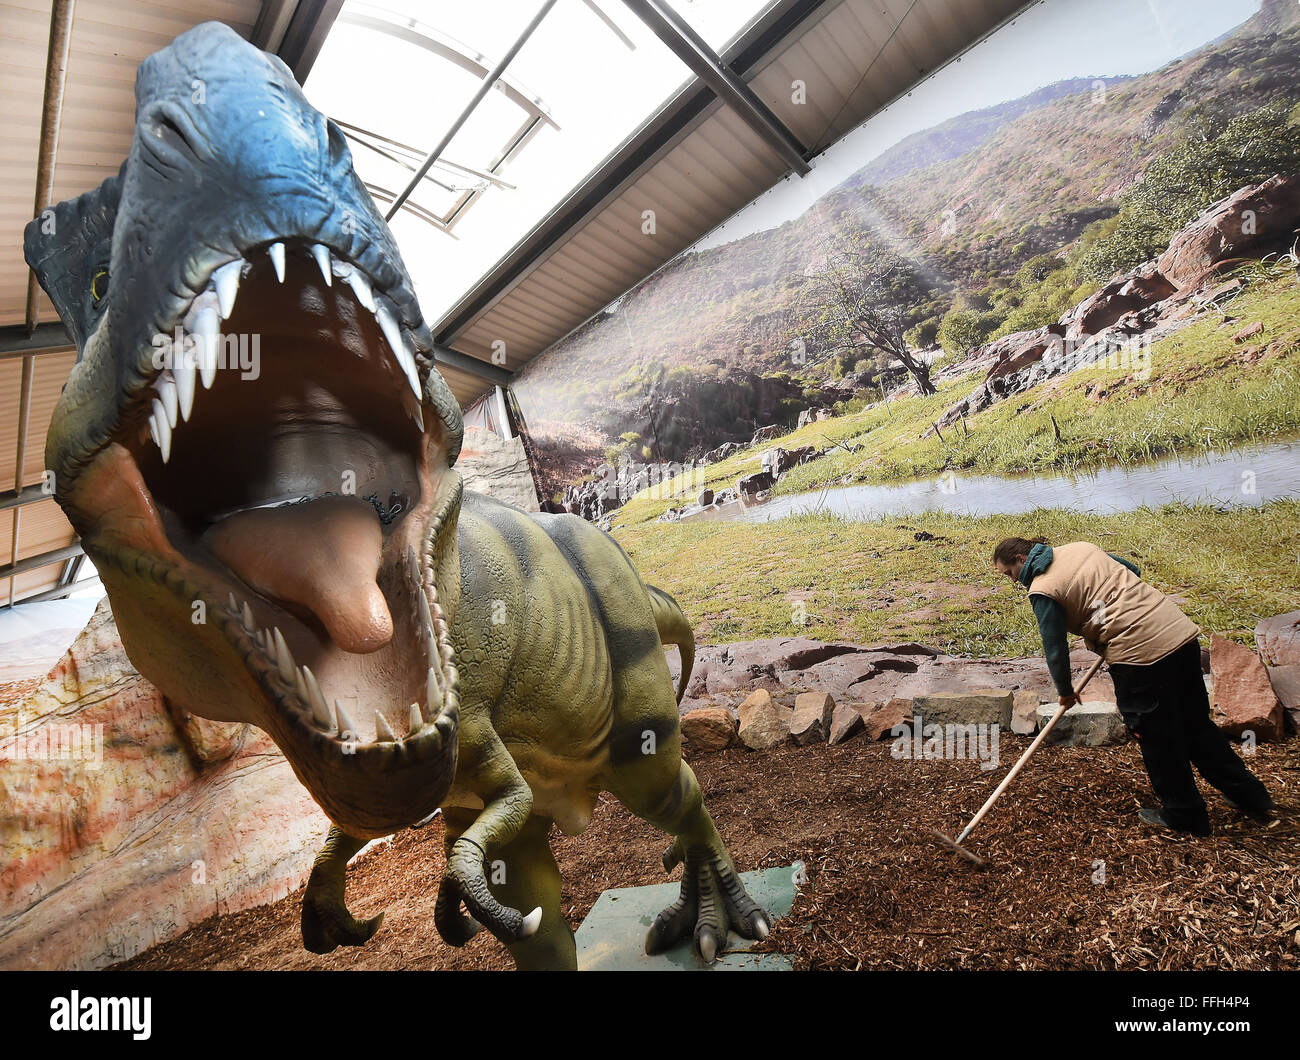 Muenchehagen, Germany. 11th Feb, 2016. Staff member Lina Leschner prepares the ground next to a replication of a young Tyrannosaurus Rex for the Dinosaur exhibition at the Dinopark in Muenchehagen, Germany, 11 February 2016. The exhibition presents insights into the family life of dinosaurs, including rare dinosaur baby fossiles and their find spot. PHOTO: HOLGER HOLLEMANN/dpa/Alamy Live News Stock Photo